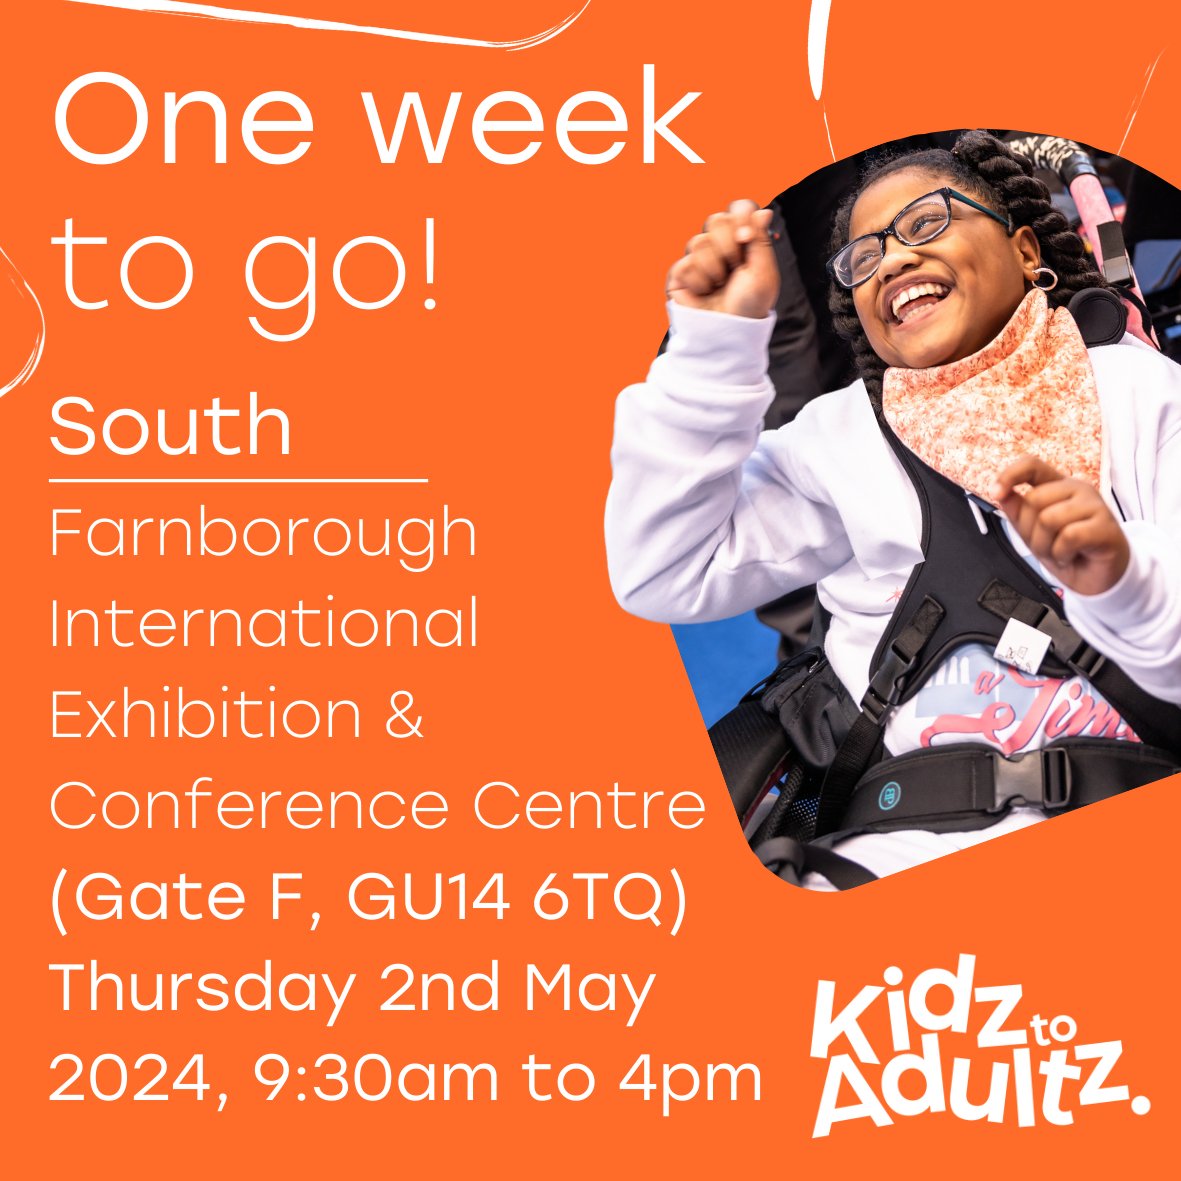 We are looking forward to attending the @kidztoadultz South event next week! If you are attending the event come say hi and check out all we have to offer including VersaEye - our new iOS eye-gaze solution!